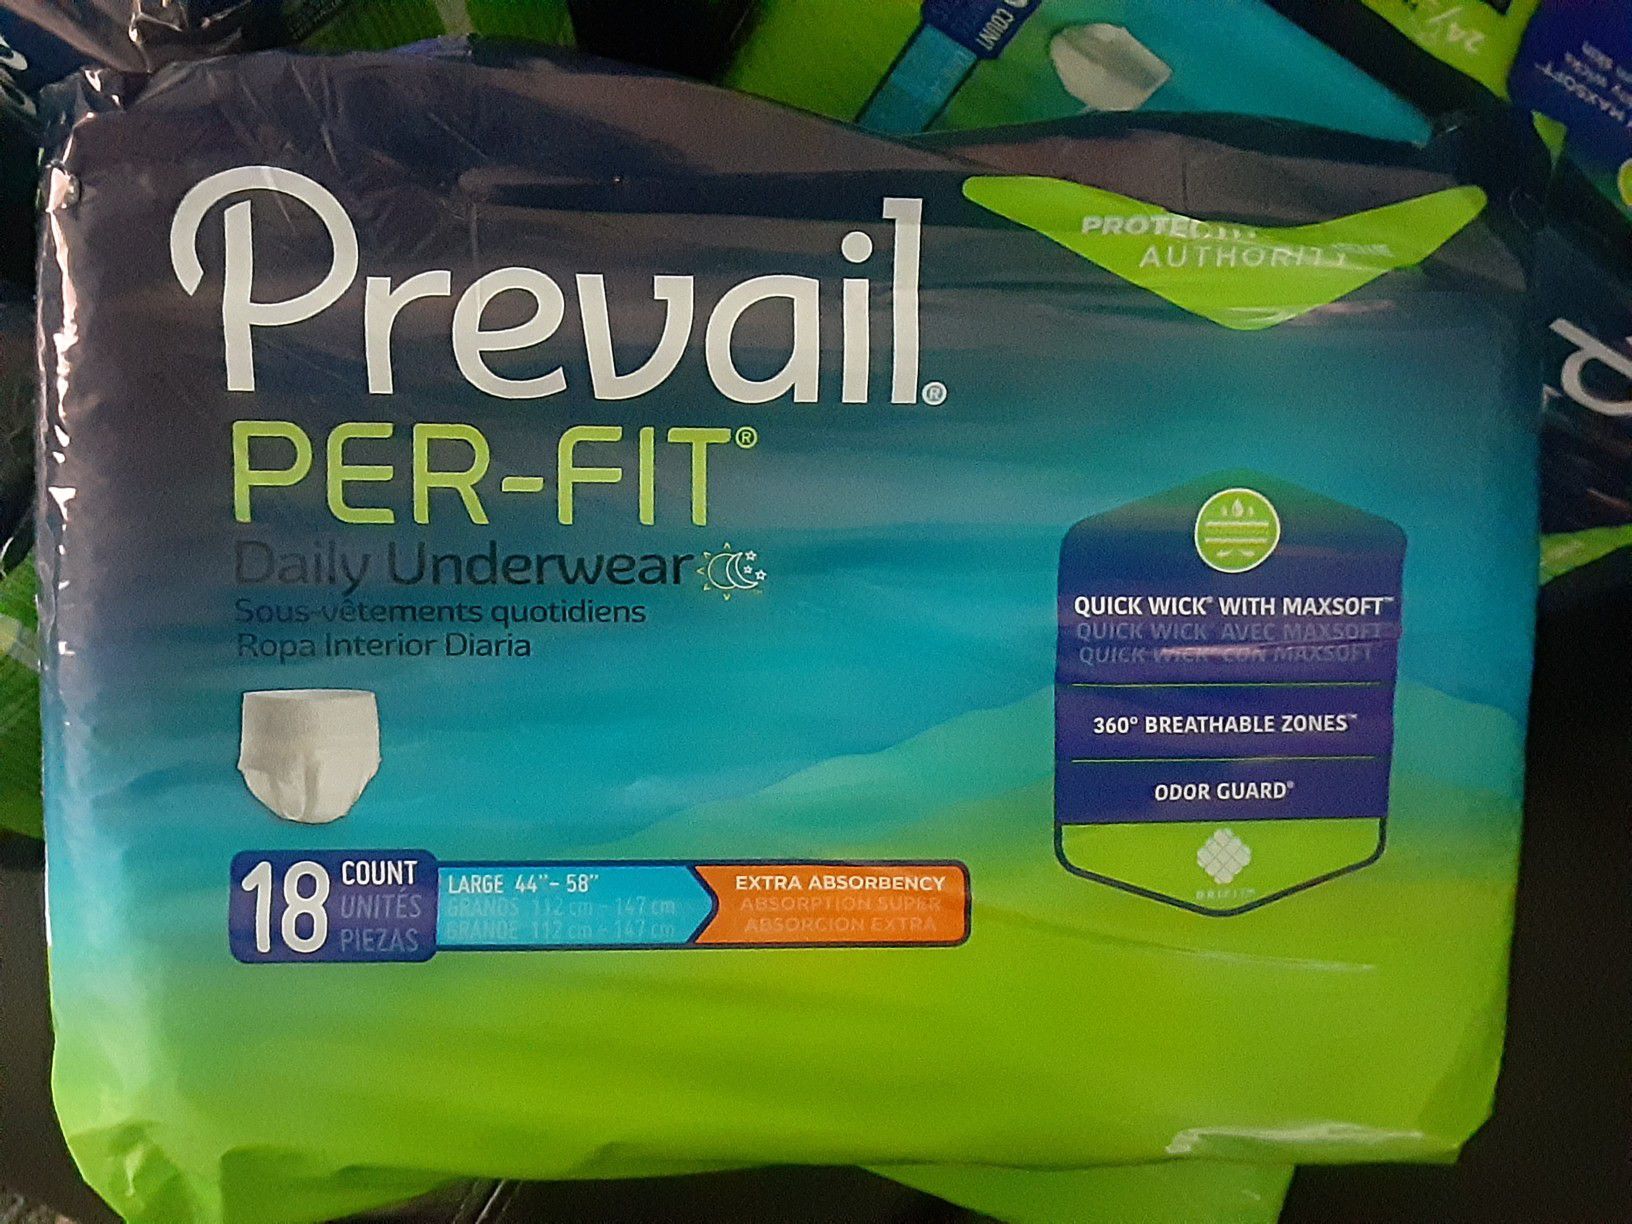 Daily underwear (diapers)